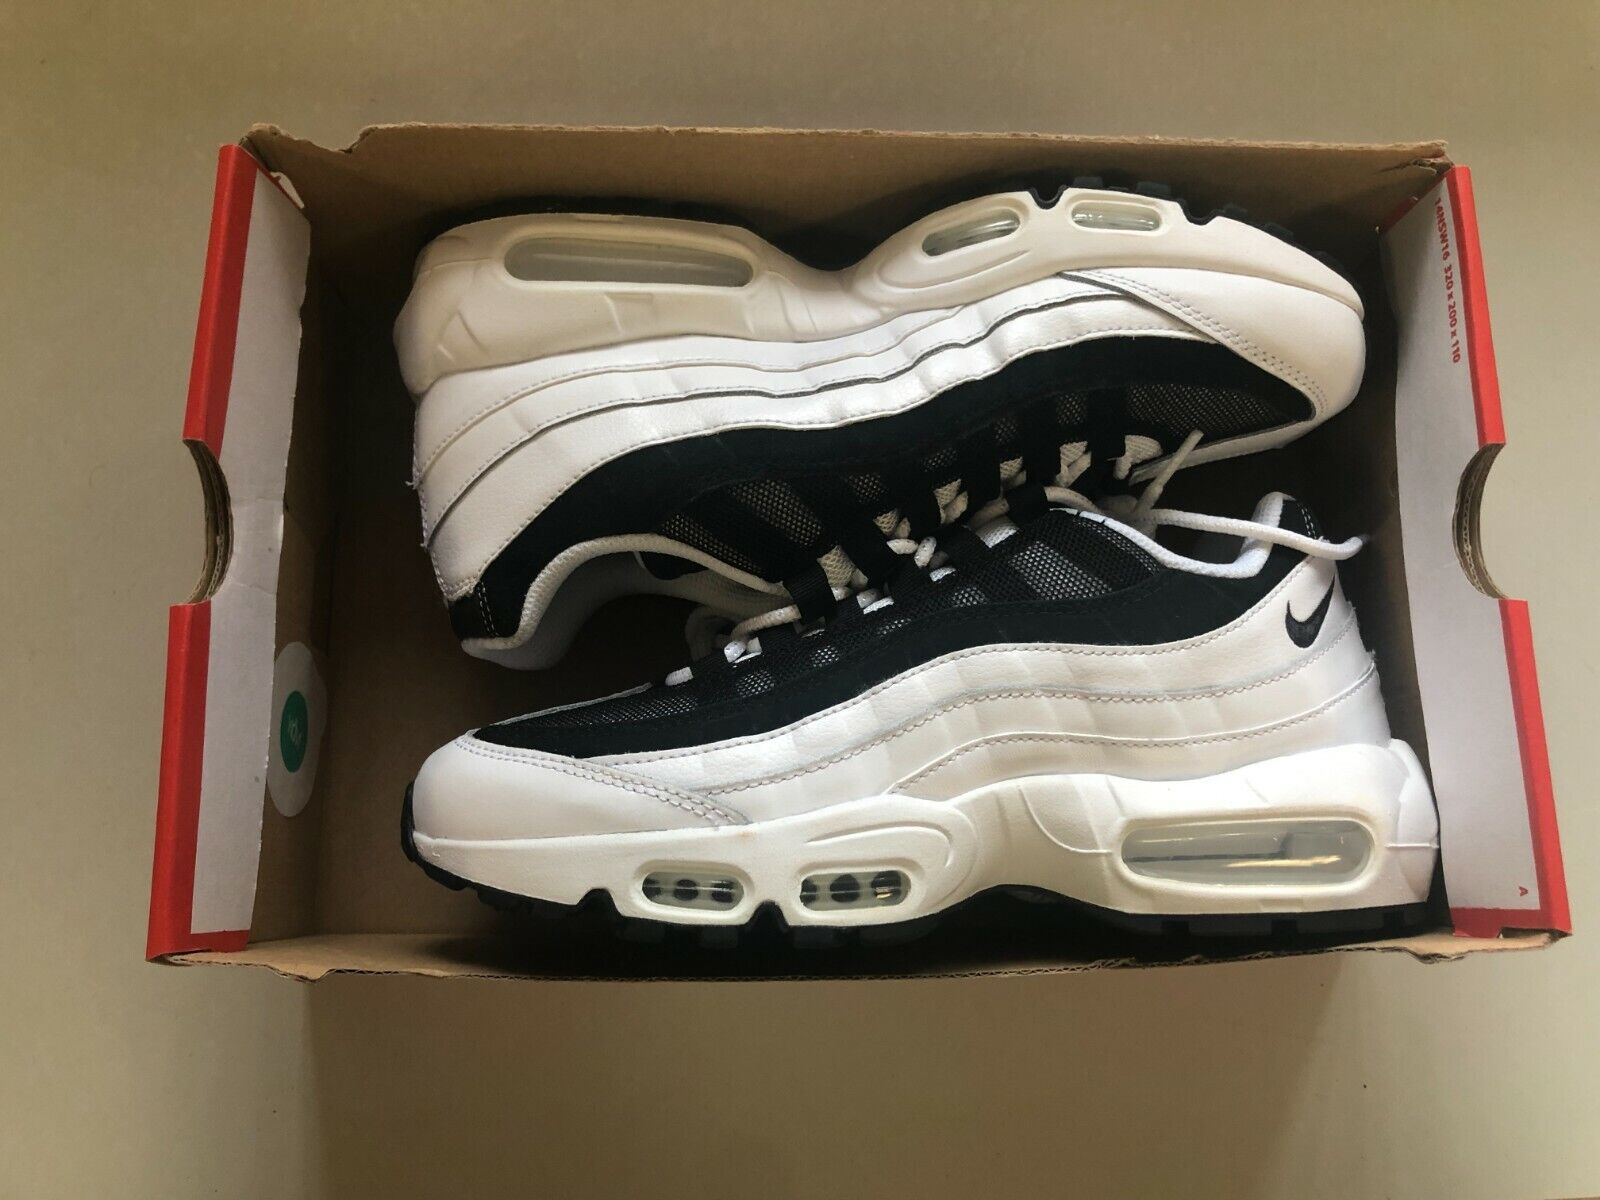 Size 8.5 - Nike Air Max 95 Ying Yang Pack - WhiteCK6884-100 for 